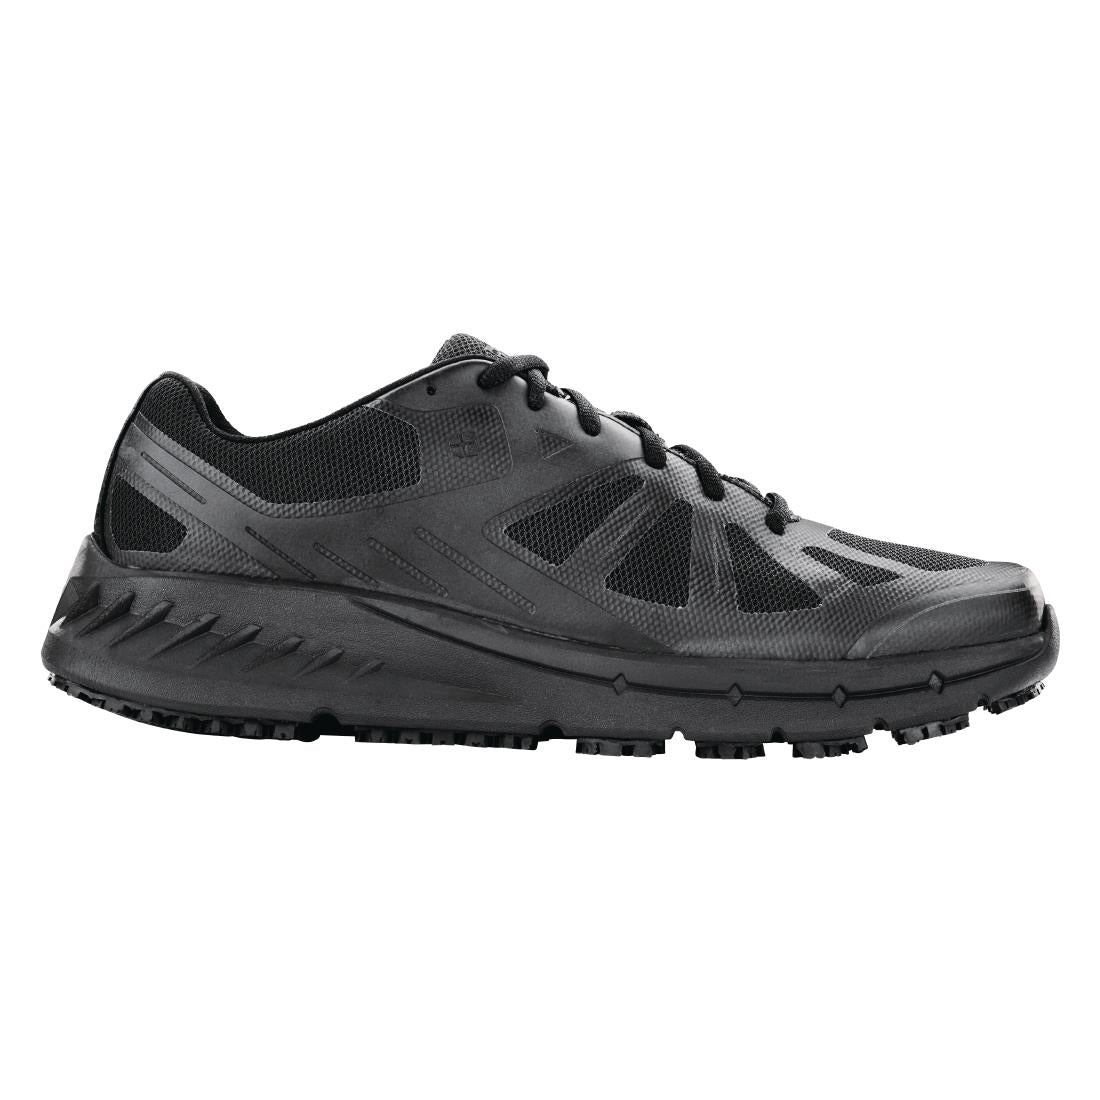 BB599-41 Shoes for Crews Endurance Trainers Black Size 41